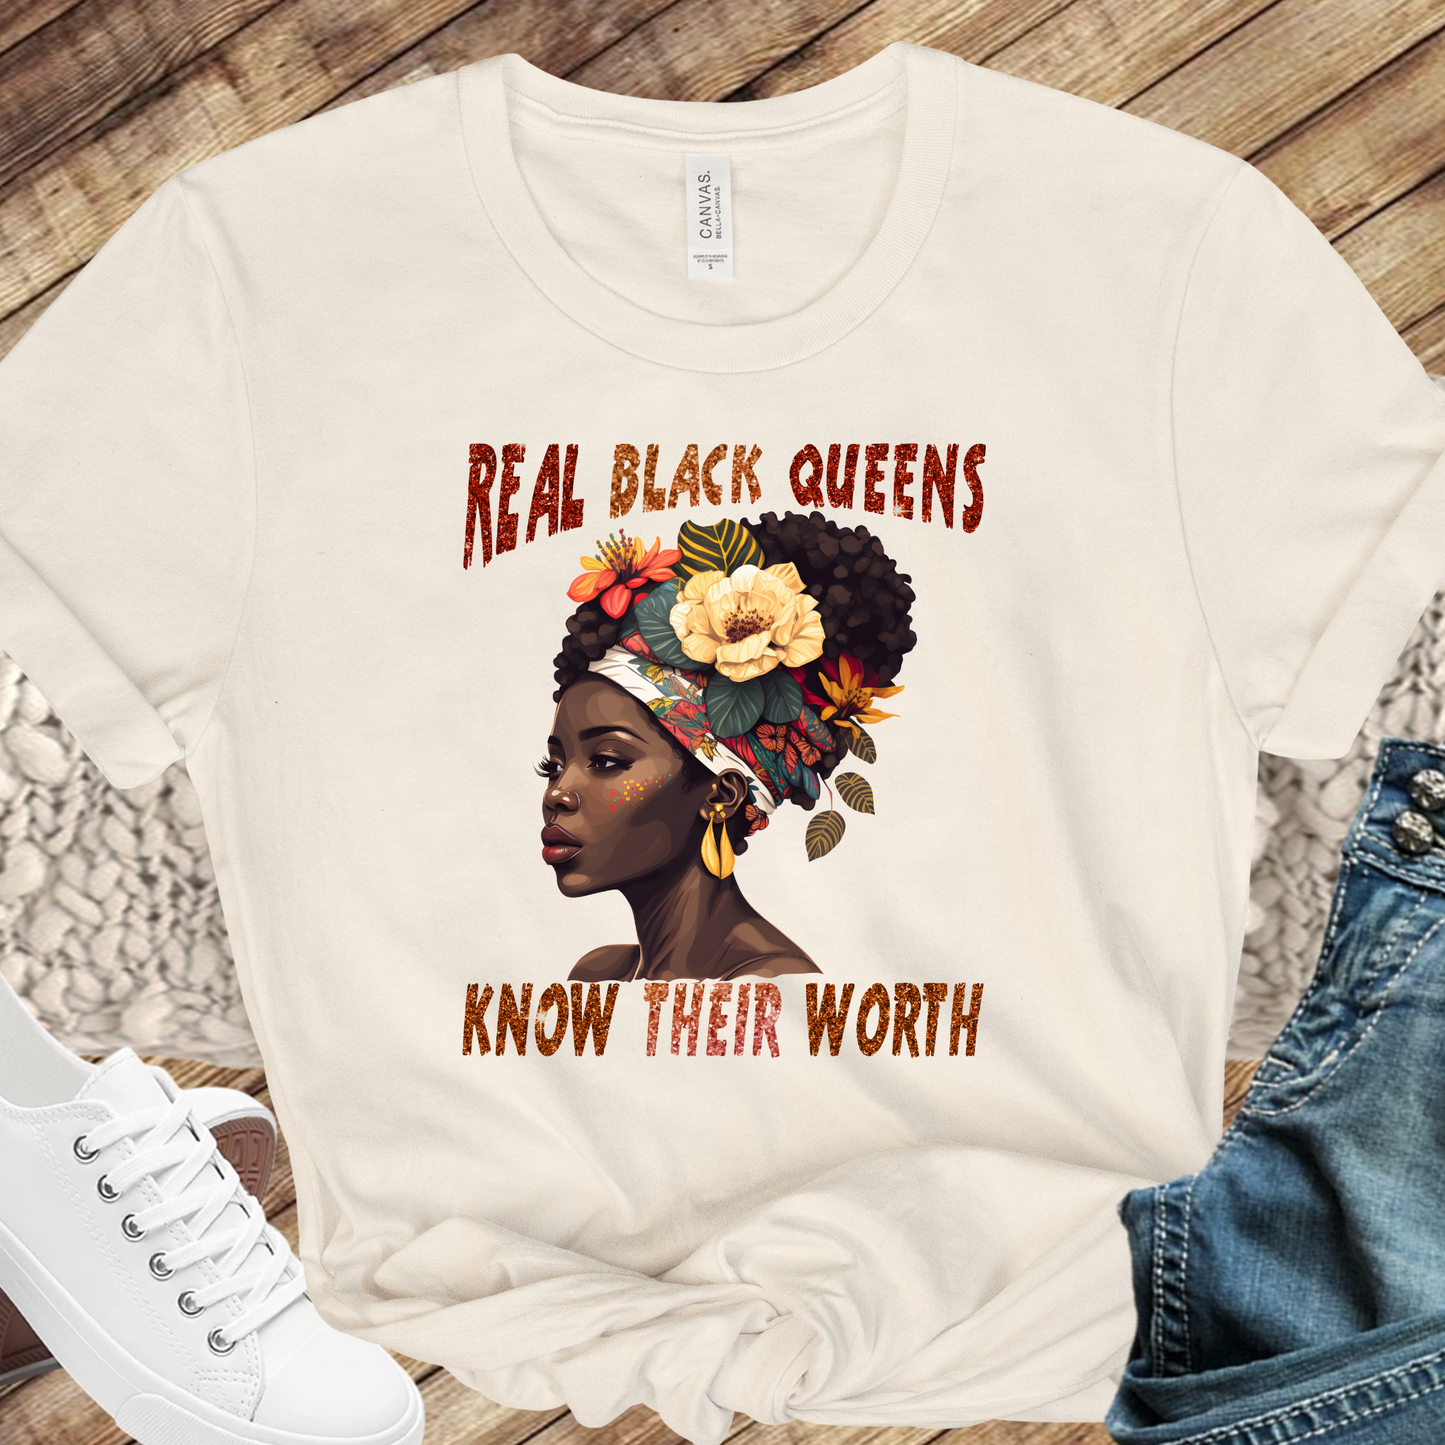 Beautiful Black Queen - Real Black Queens Know Their Worth Direct to Film Transfer